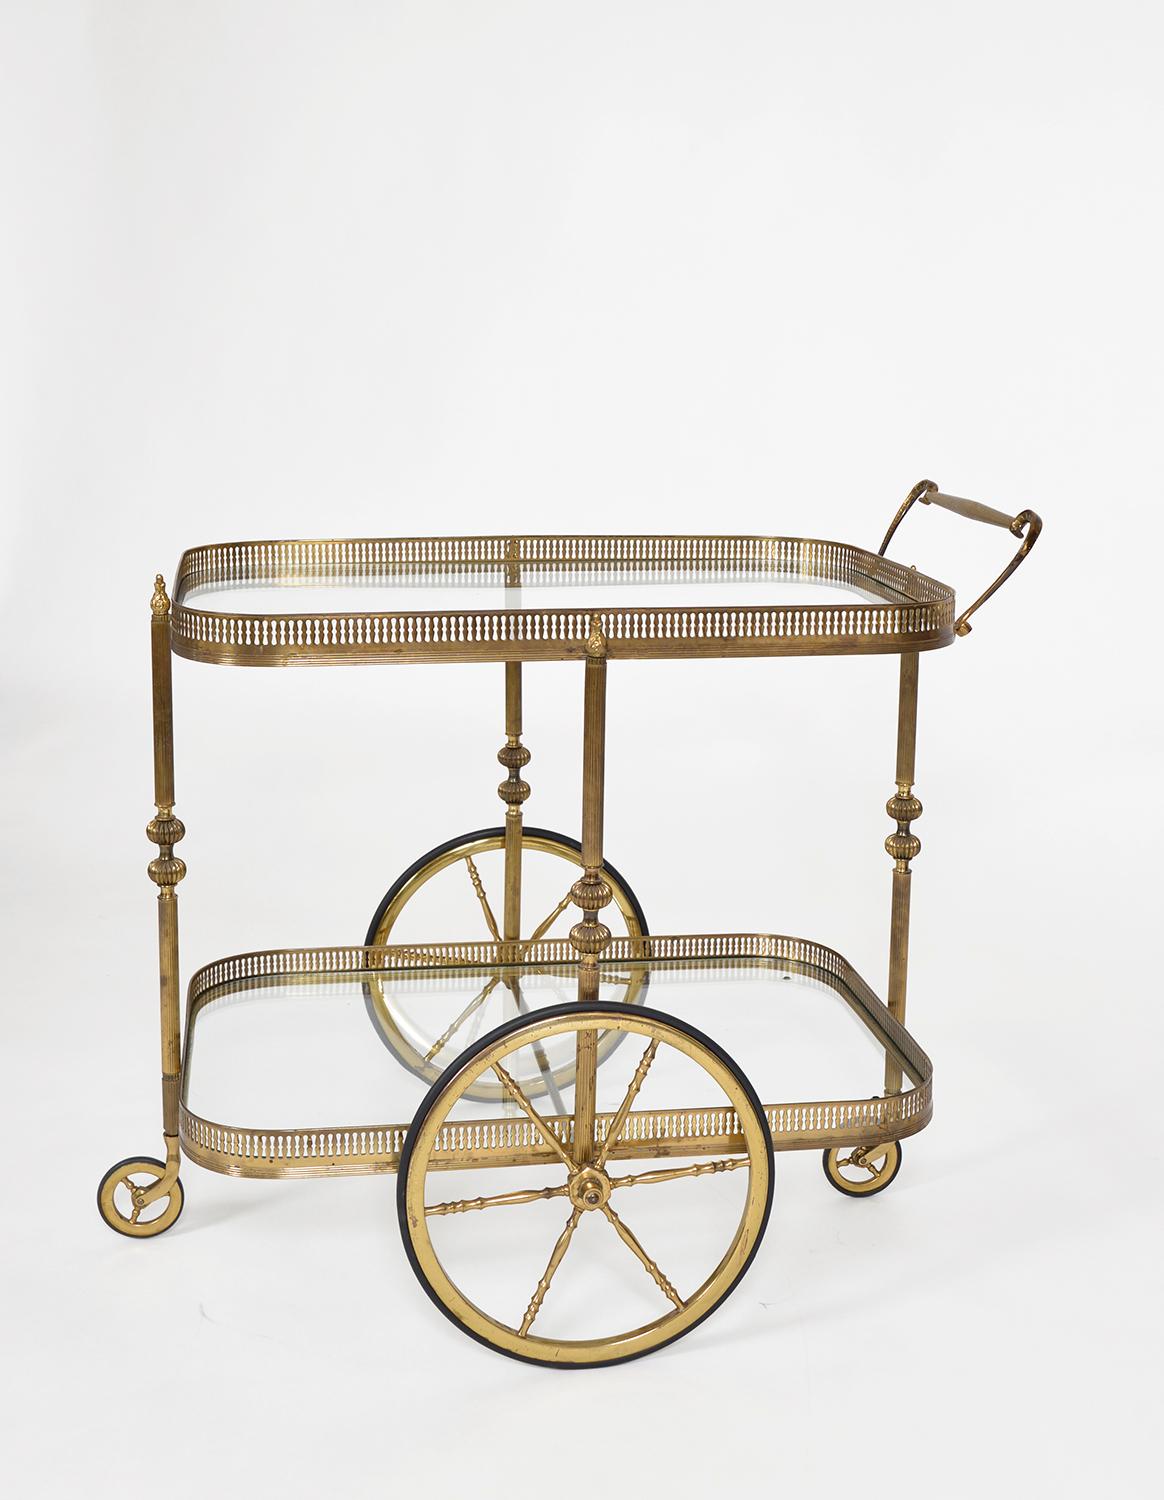 Mid-20th Century French 1940s Neoclassical Brass Bar Cart Drinks Serving Trolley Maison Jansen